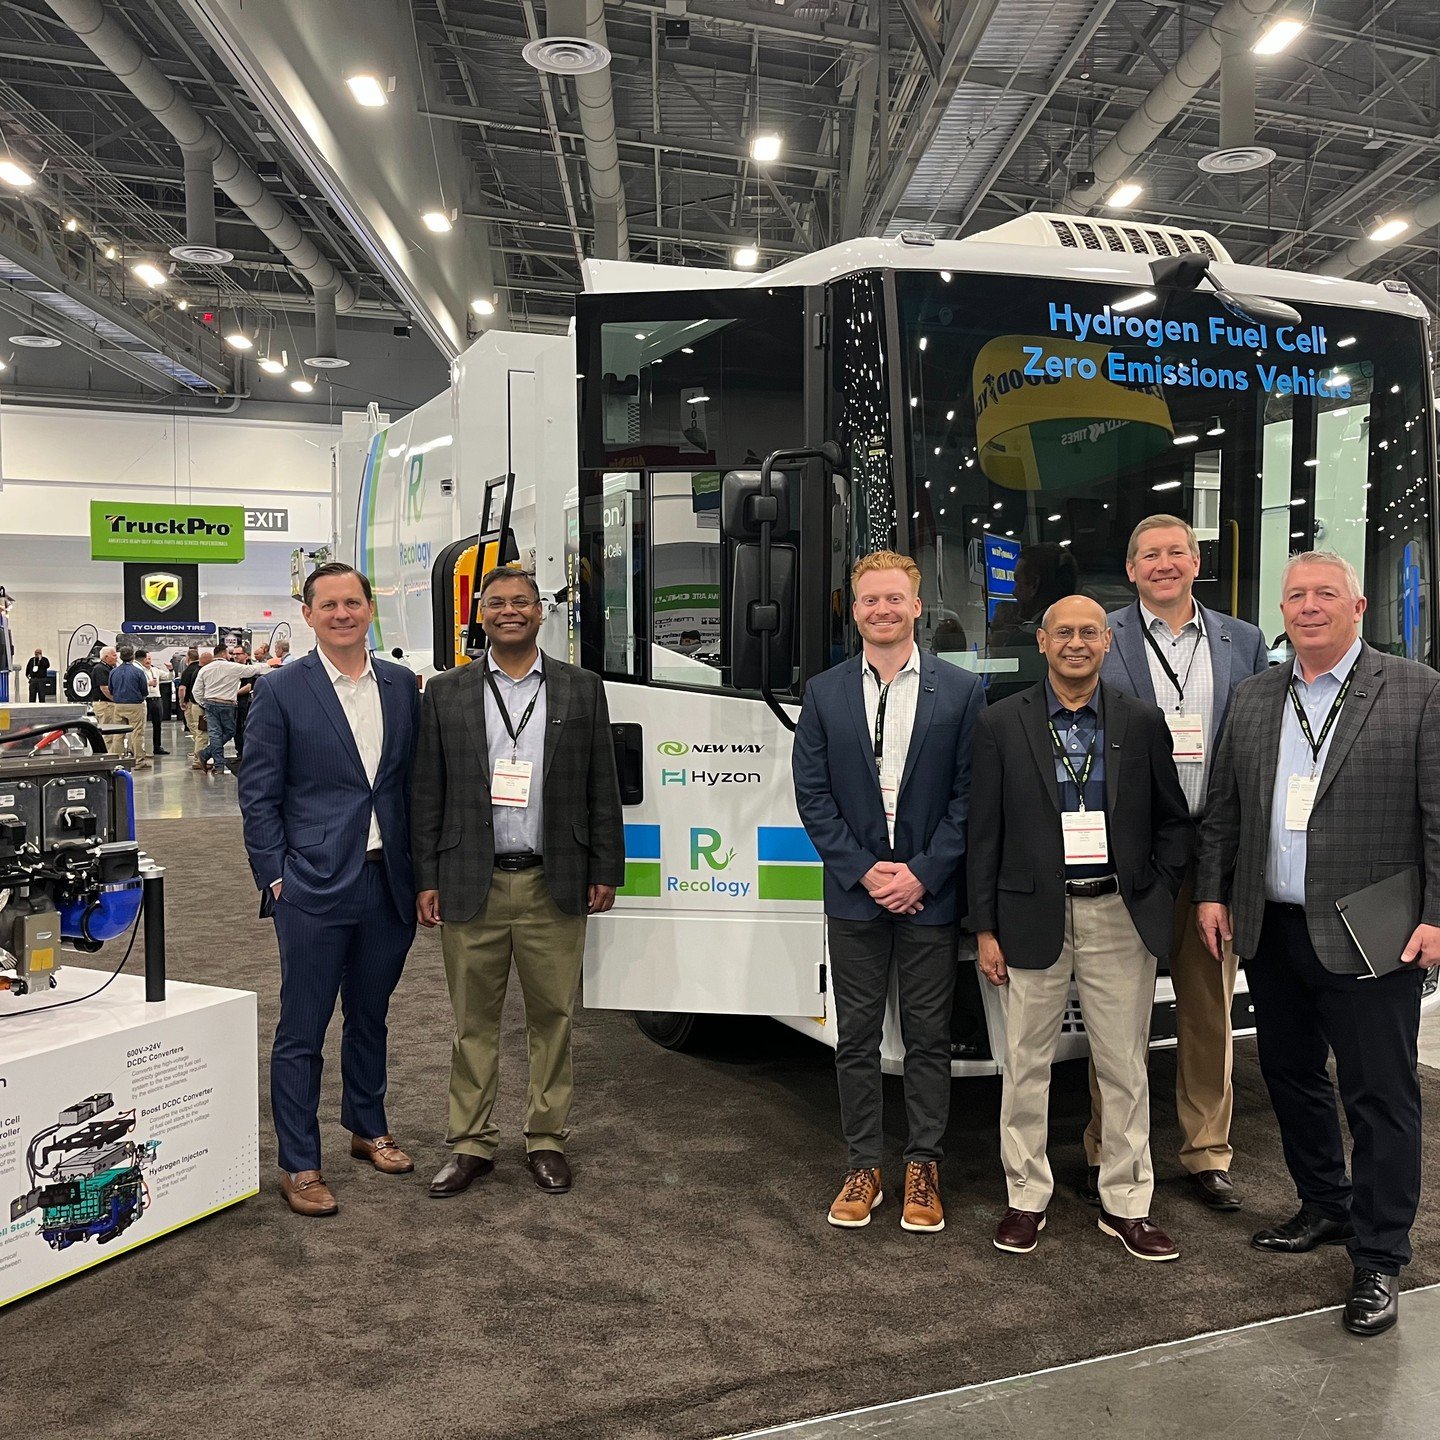 Day No. 1 was a huge success, and the excitement continues! Come see North America's first hydrogen fuel cell-powered refuse truck at @wasteexpo in booth No. 1341. Be a part of history and join us to see how @Hyzon and @newwaytrucks are going the dis